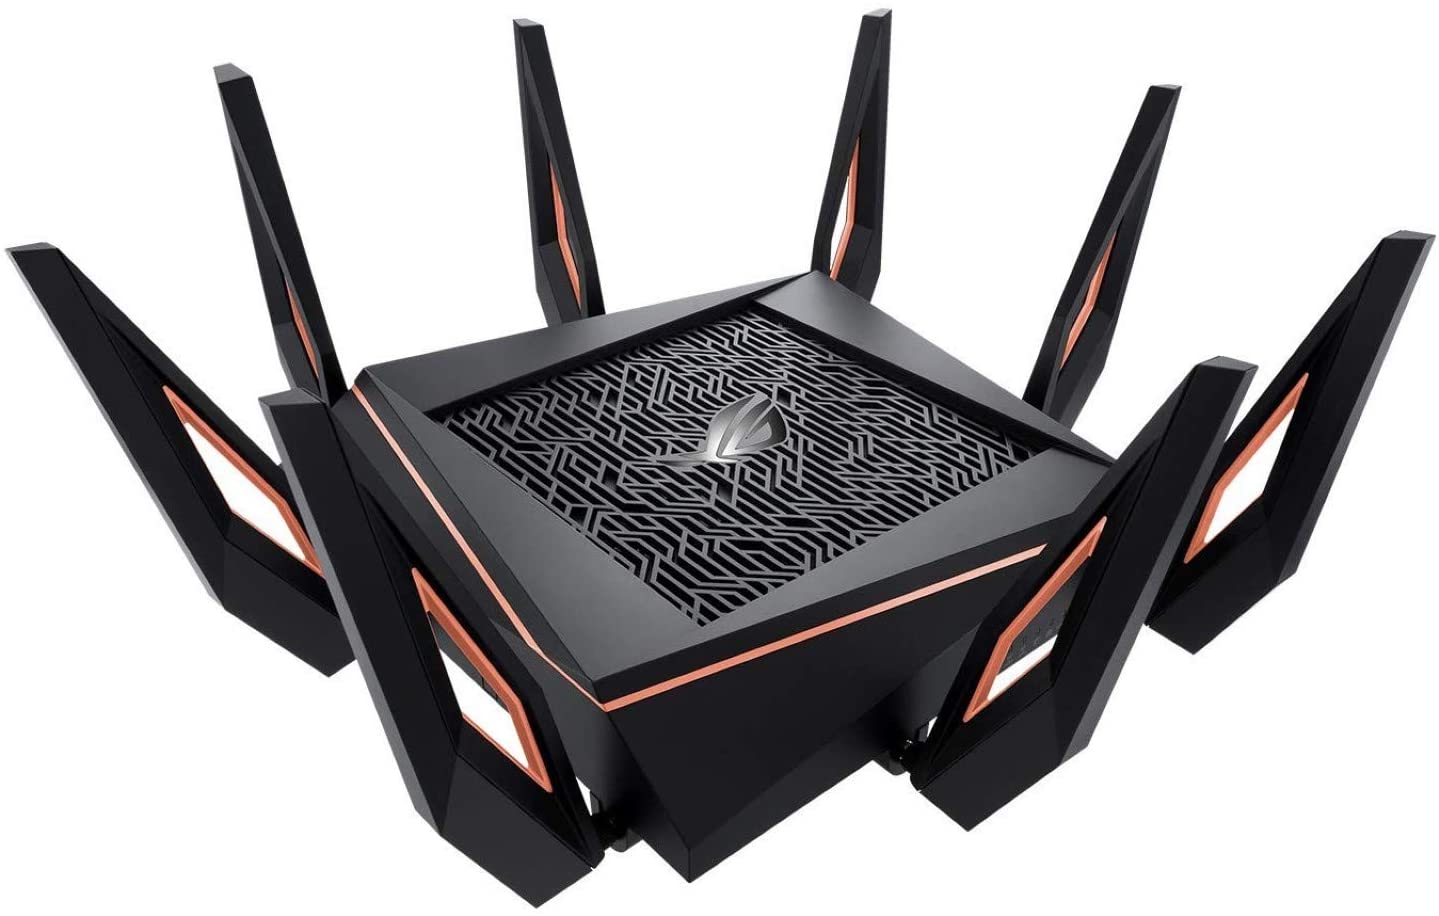 Asus GT-AX11000 meilleurs routeurs wifi gaming